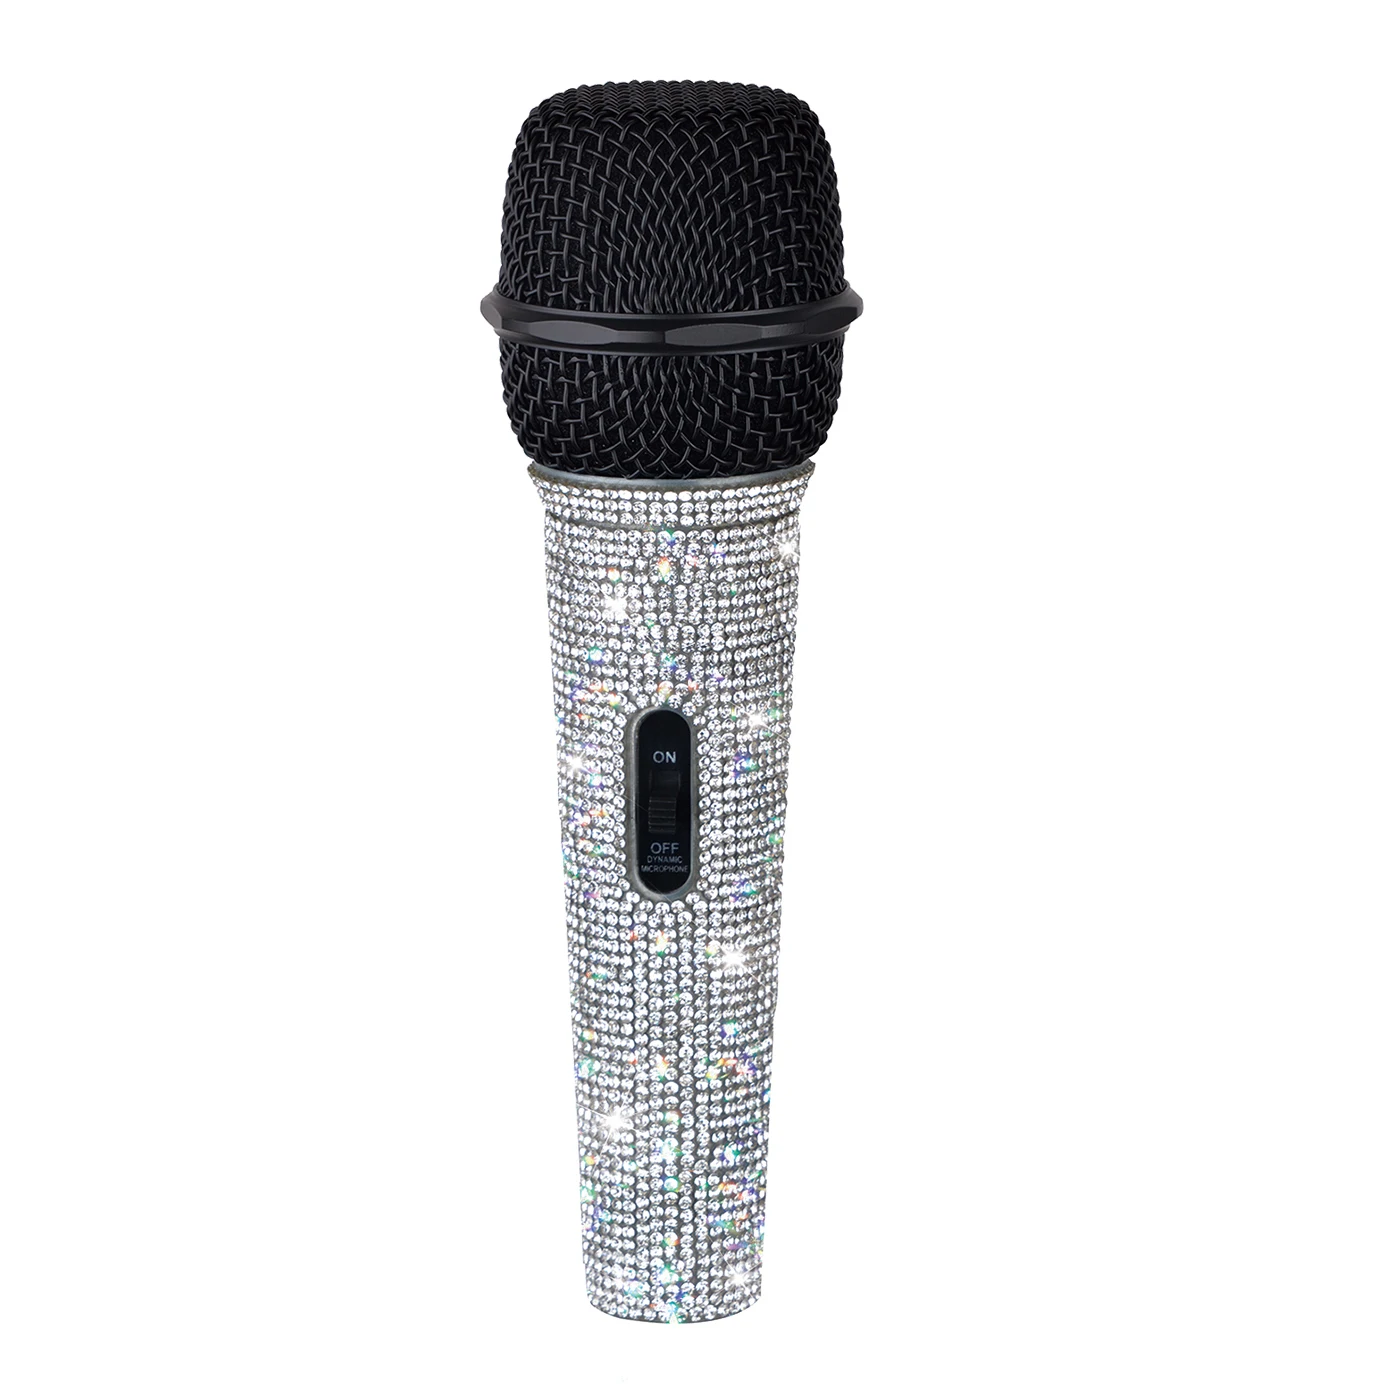 

3 Sets Heikuding Wired handheld metal Microphone Dynamic Microphone with diamond effect for karaoke Singing Mic With No cable